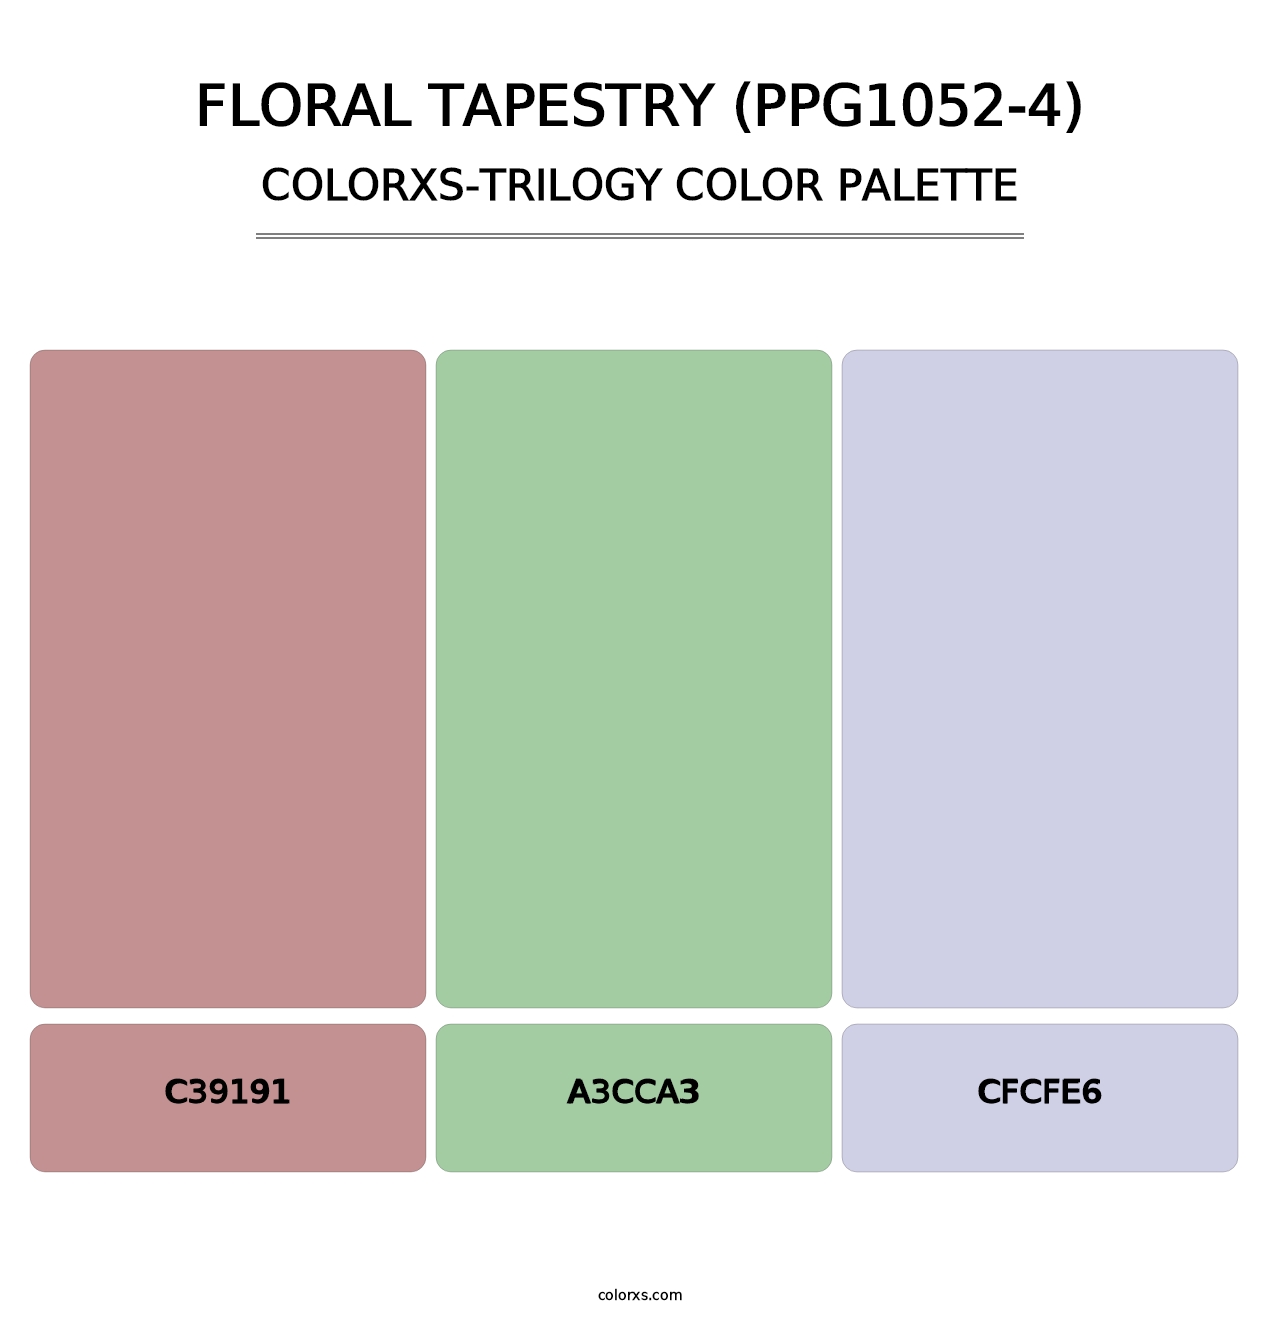 Floral Tapestry (PPG1052-4) - Colorxs Trilogy Palette